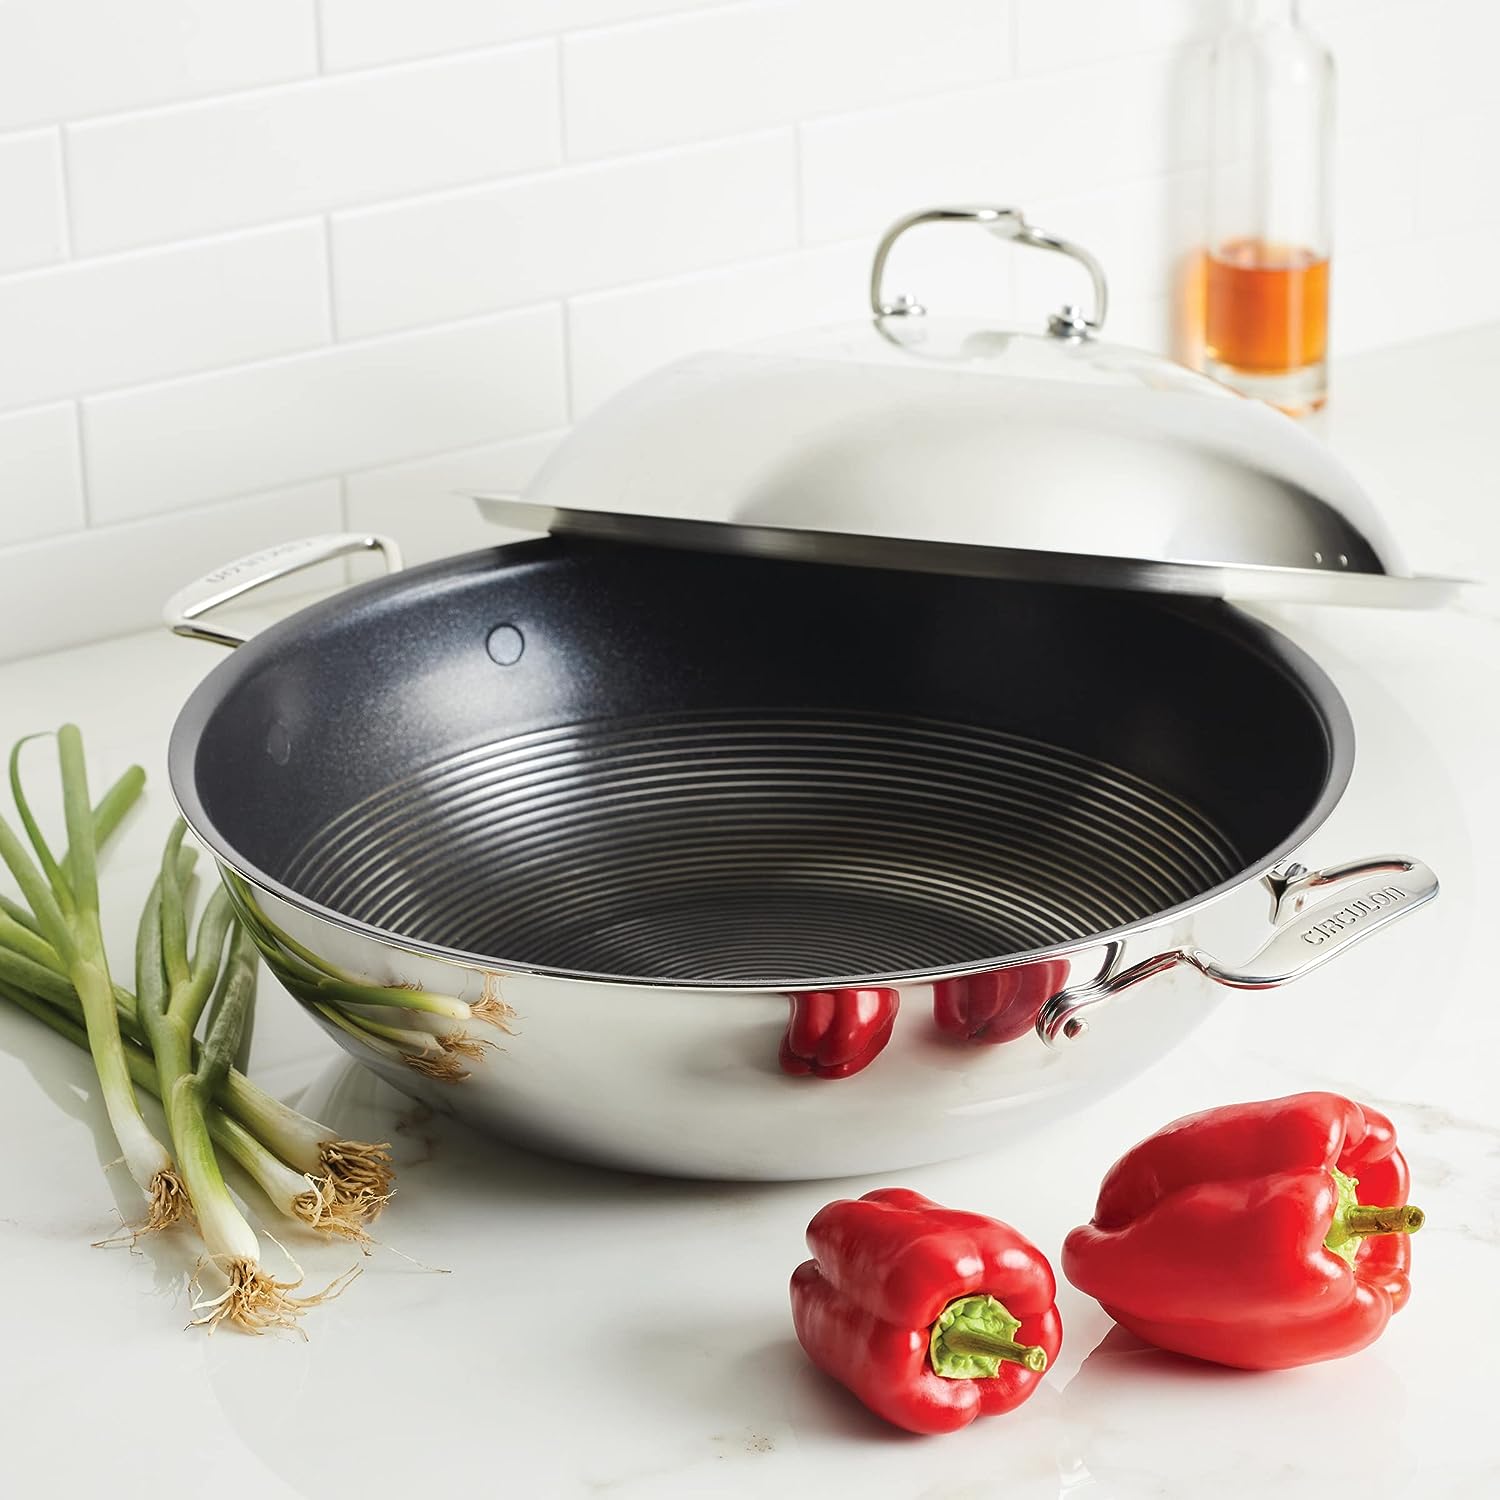 https://bigbigmart.com/wp-content/uploads/2023/09/Circulon-Clad-Stainless-Steel-Wok-Stir-Fry-with-Glass-Lid-and-Hybrid-SteelShield-and-Nonstick-Technology-14-Inch-Silver9.jpg